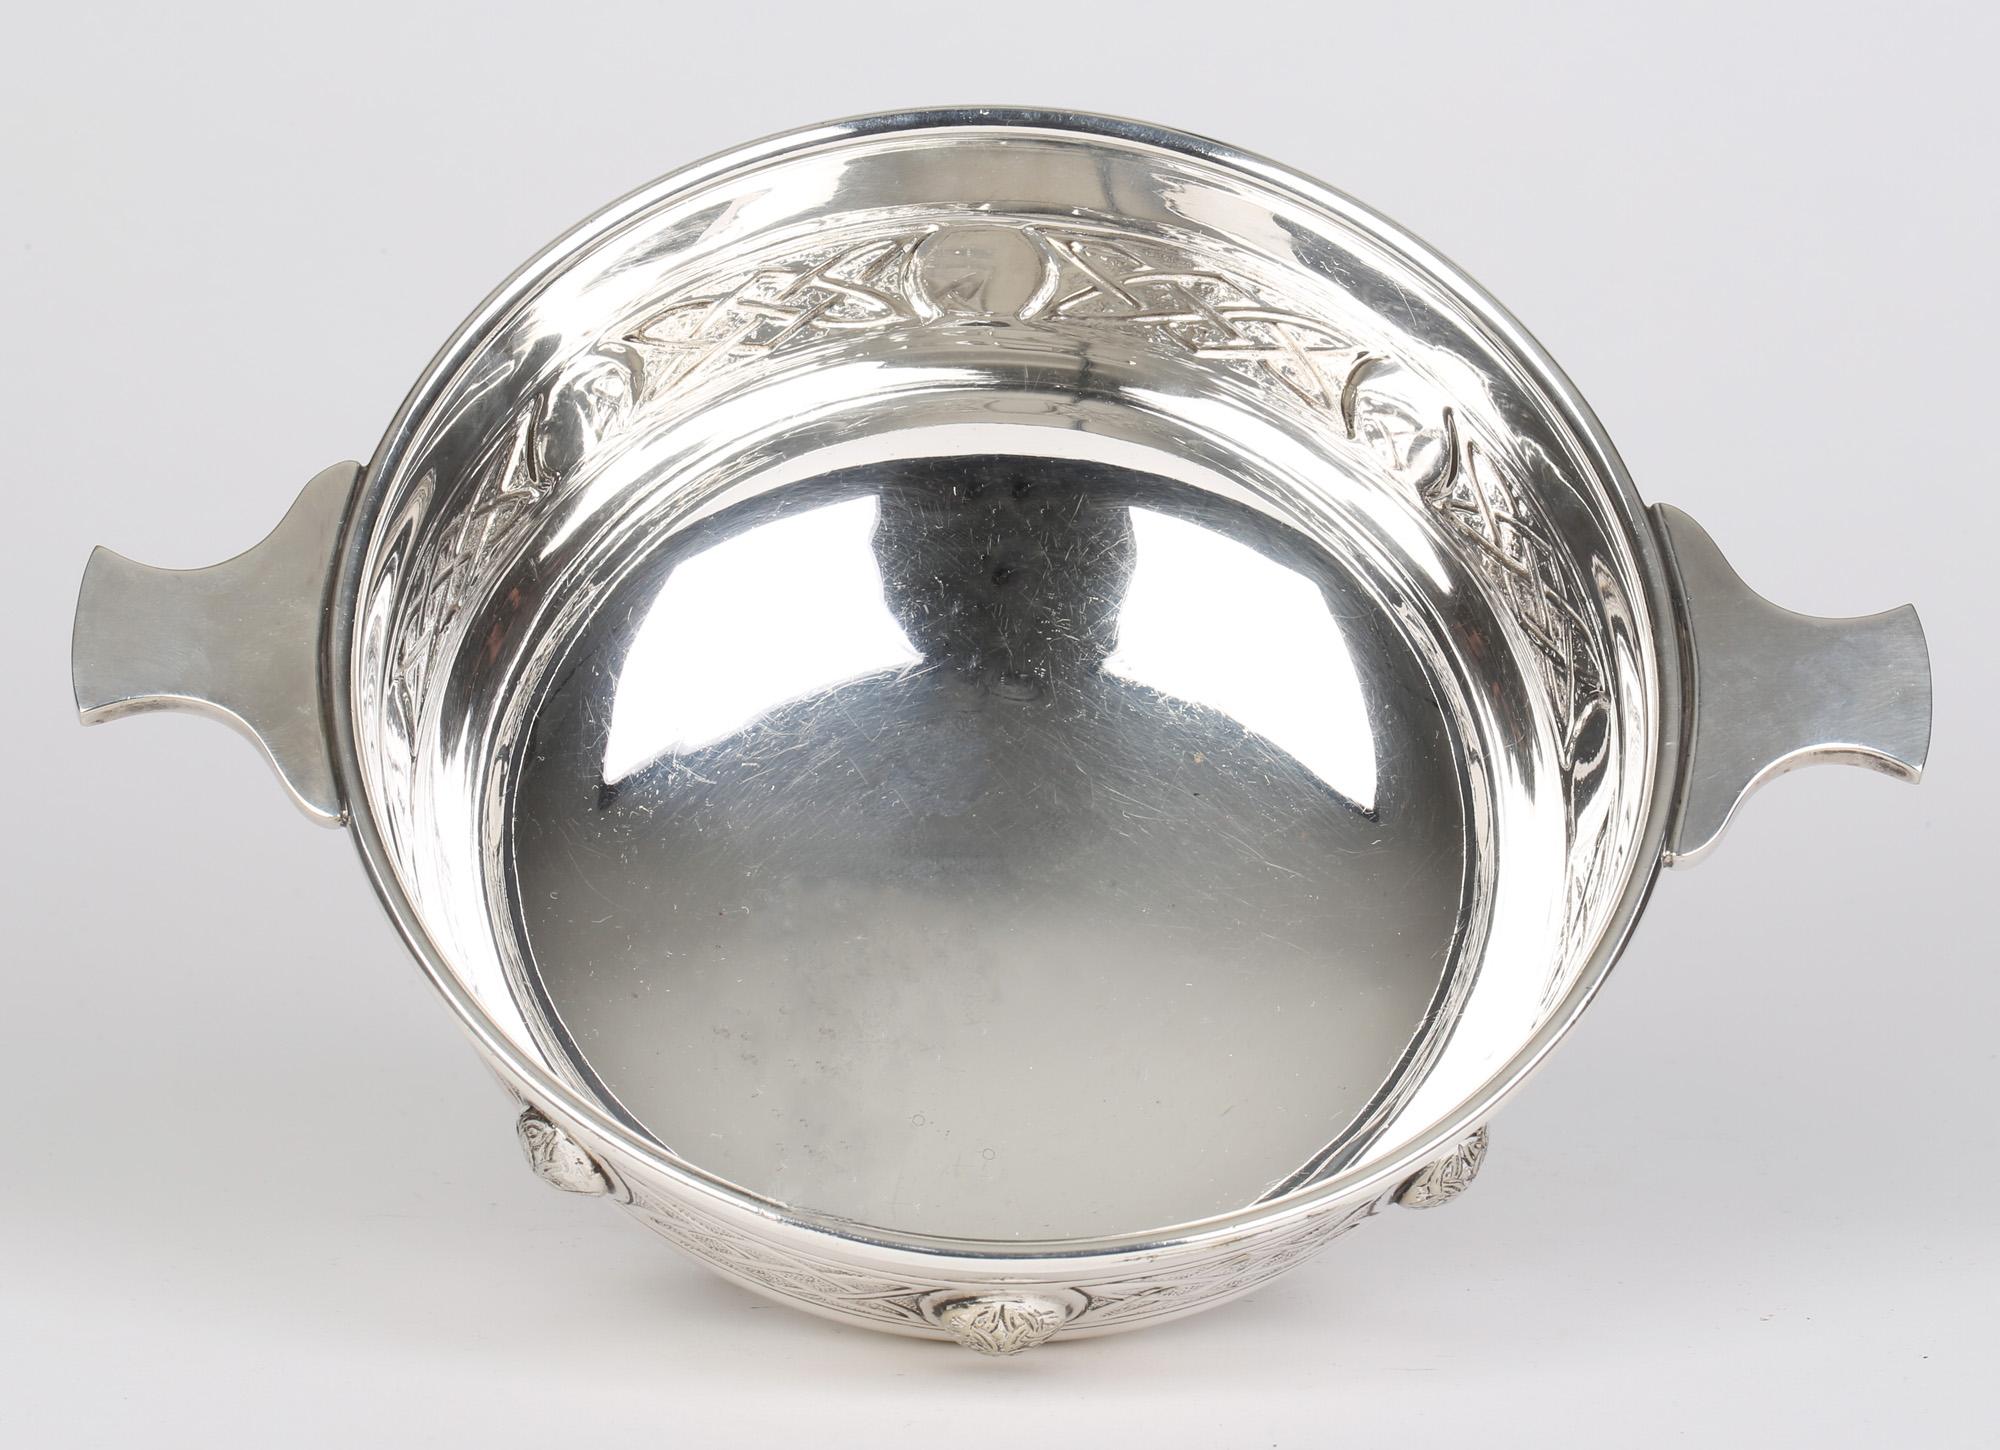 Exceptional quality large Arts & Crafts Sheffield silver plated Celtic revival large twin handled Quaiche bowl by Martin Hall & Co and dating from around 1900. This impressive and heavily made bowl stands raised on four claw styled feet the rounded